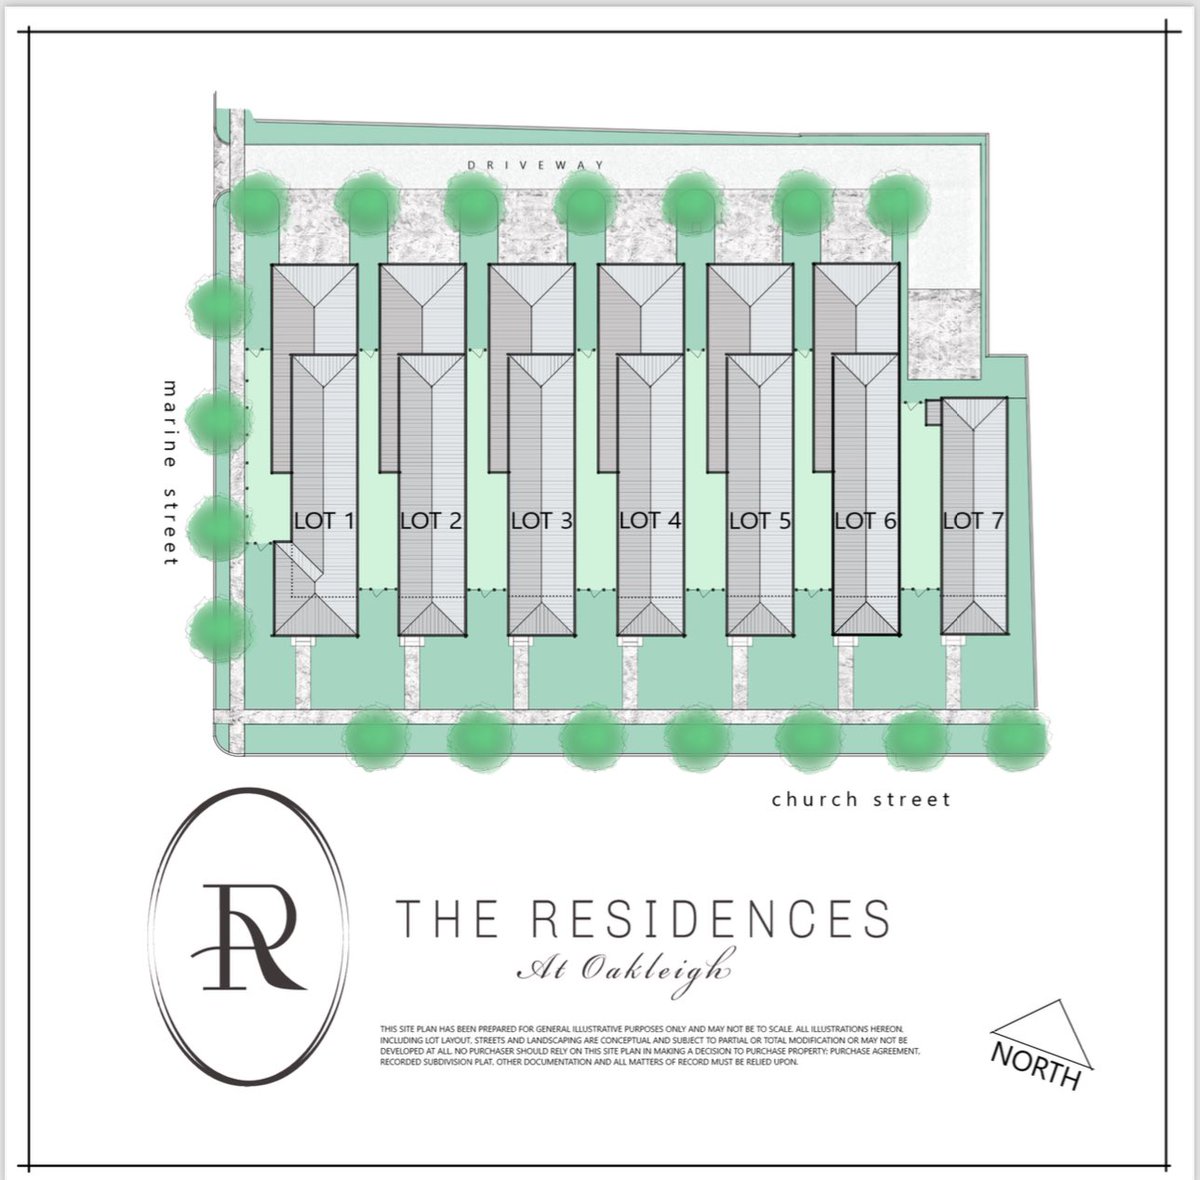 Just received our subdivision plat approval from the City of Mobile! 🥂
Next step is land disturbance 🚧 permit. We are anticipating that site work will begin the first week of May. 

DM me for details on availability.📲

#itshappening
#theresidencesatoakleigh
#mobilealabama